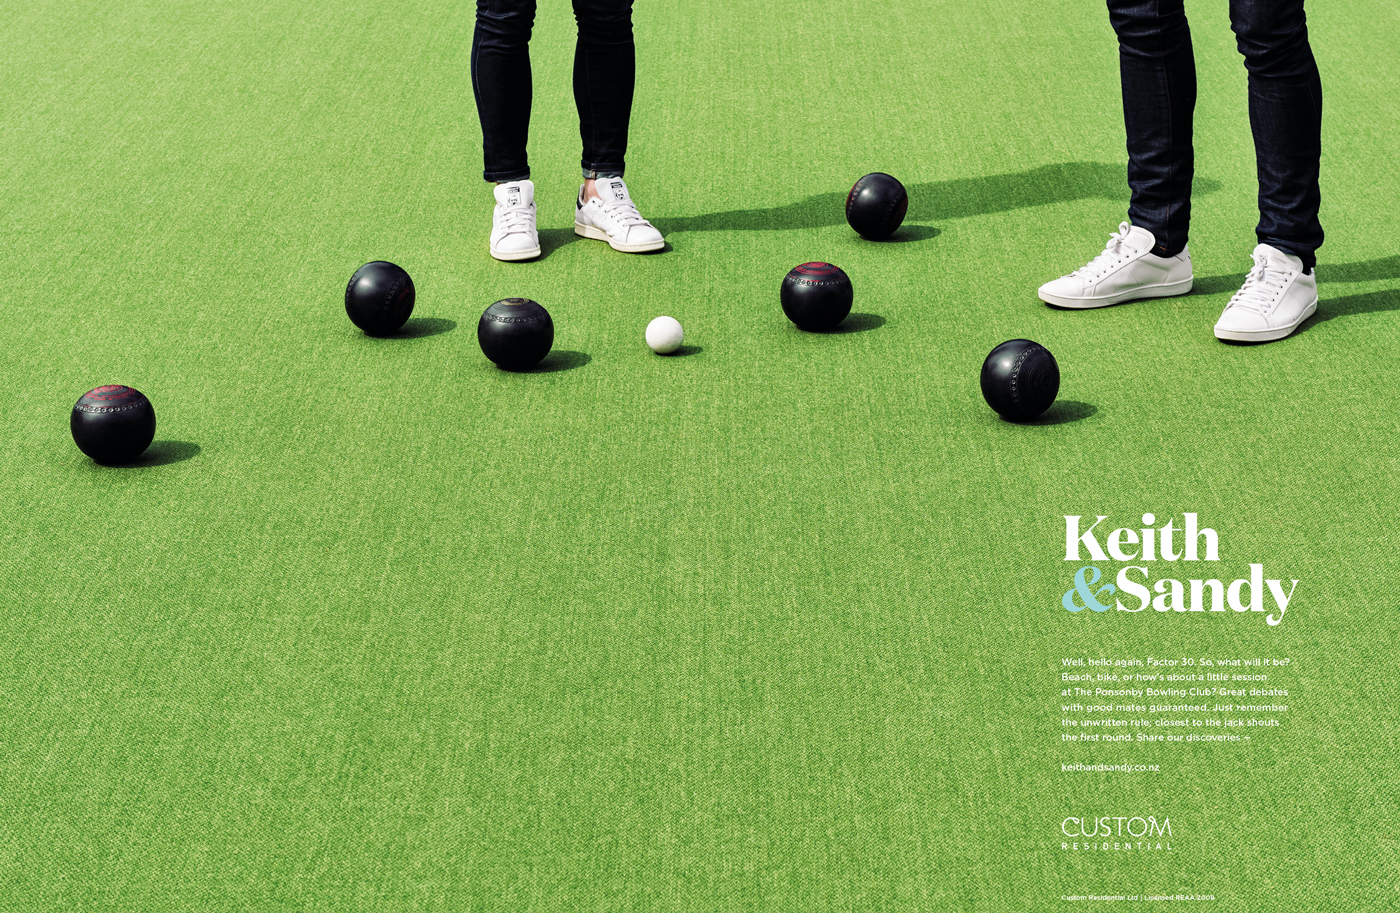 Keith and Sandy branding – Denizen – designer trainers and bowling balls on expansive bowling green